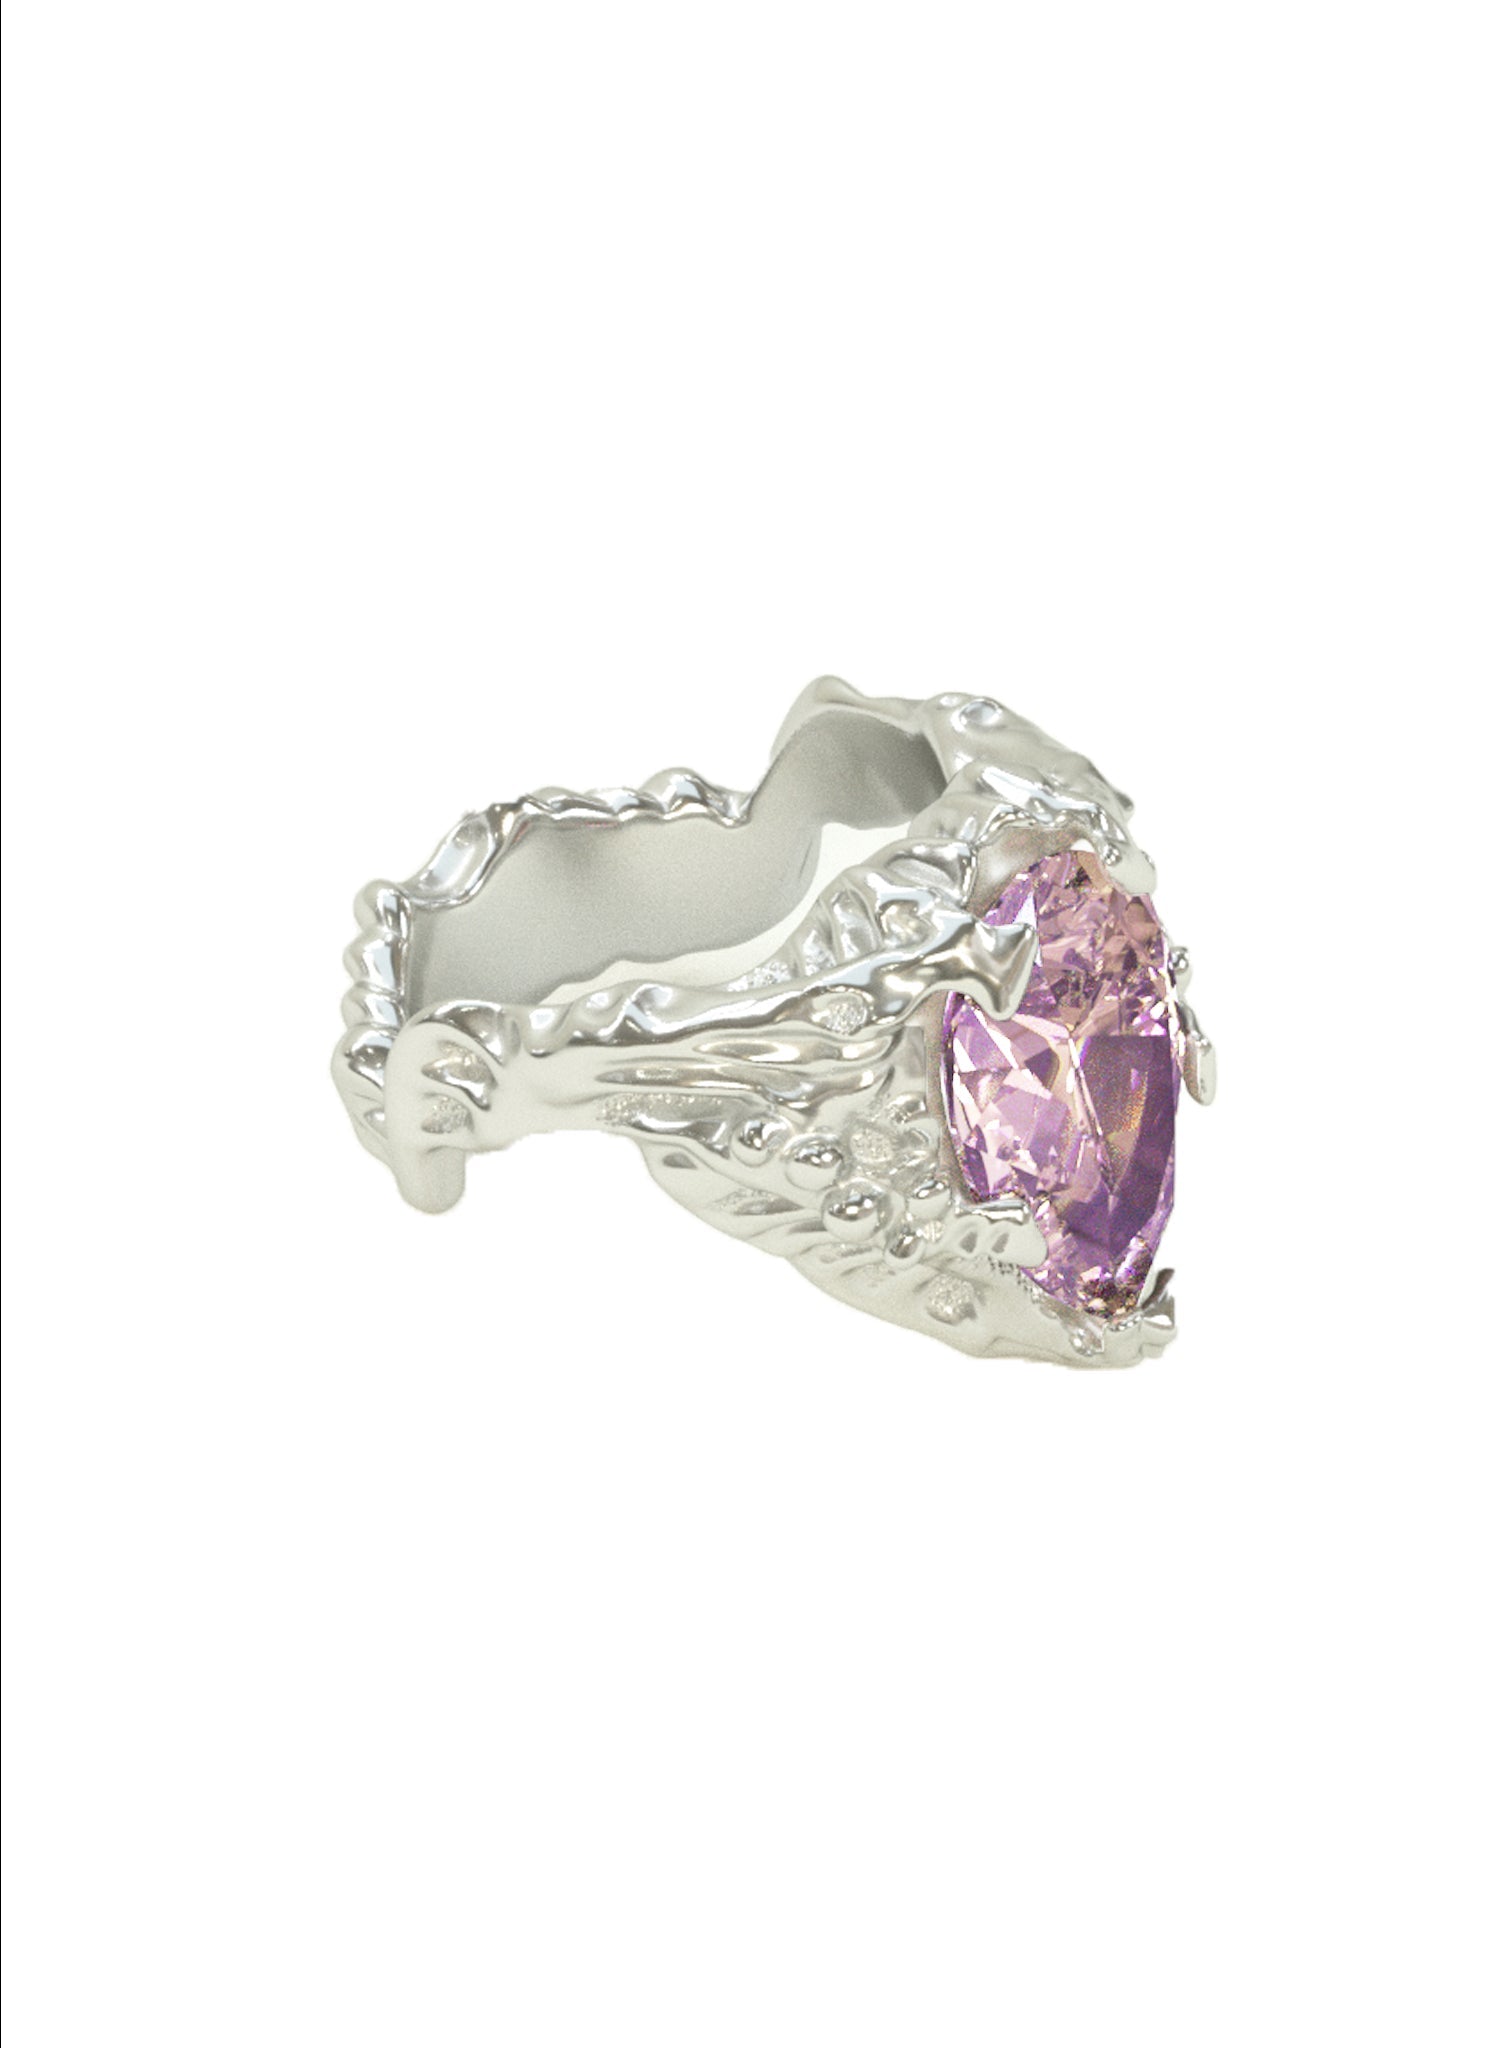 MOLTEN PINK PEAR CUT RING - LETRA